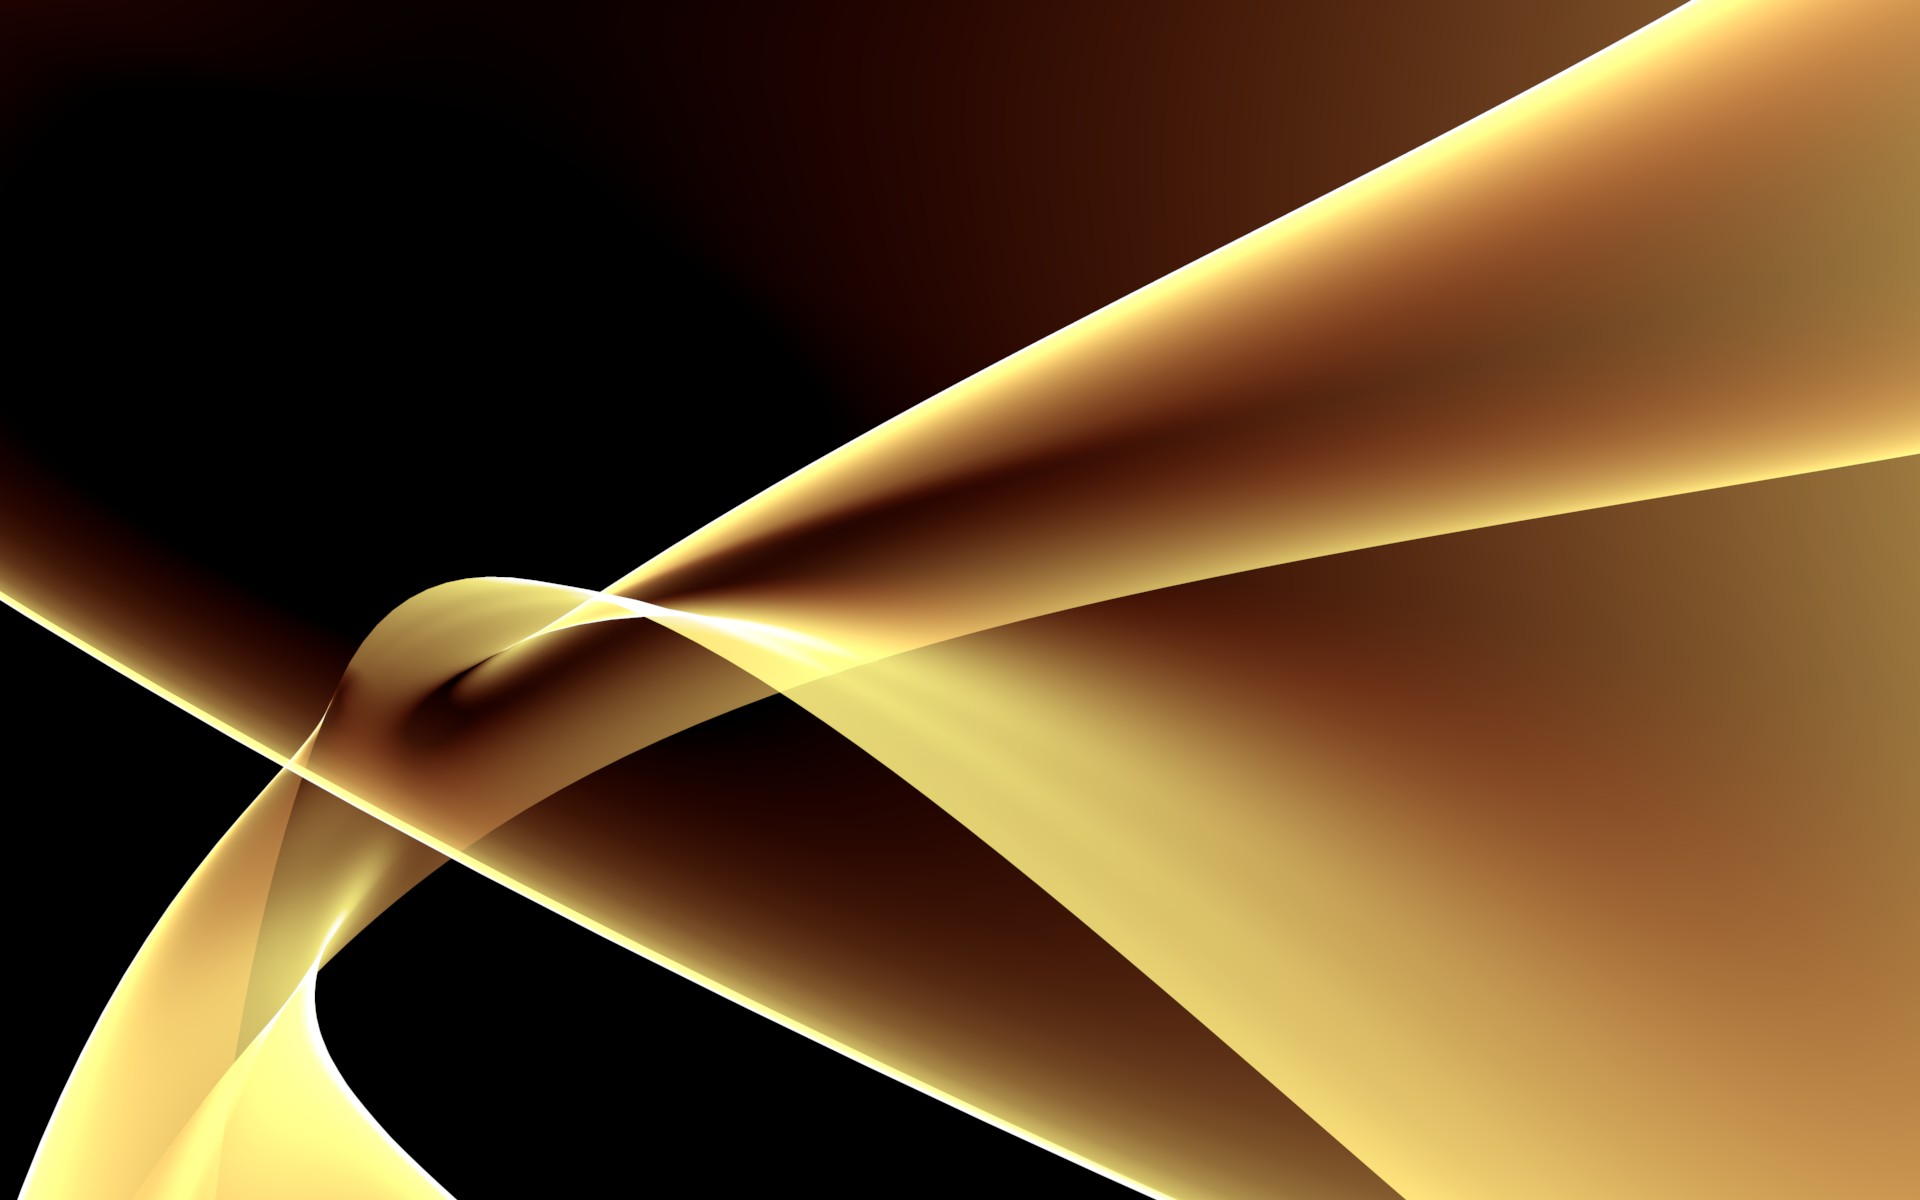 Black and Gold  wallpaper   Download free cool full HD  